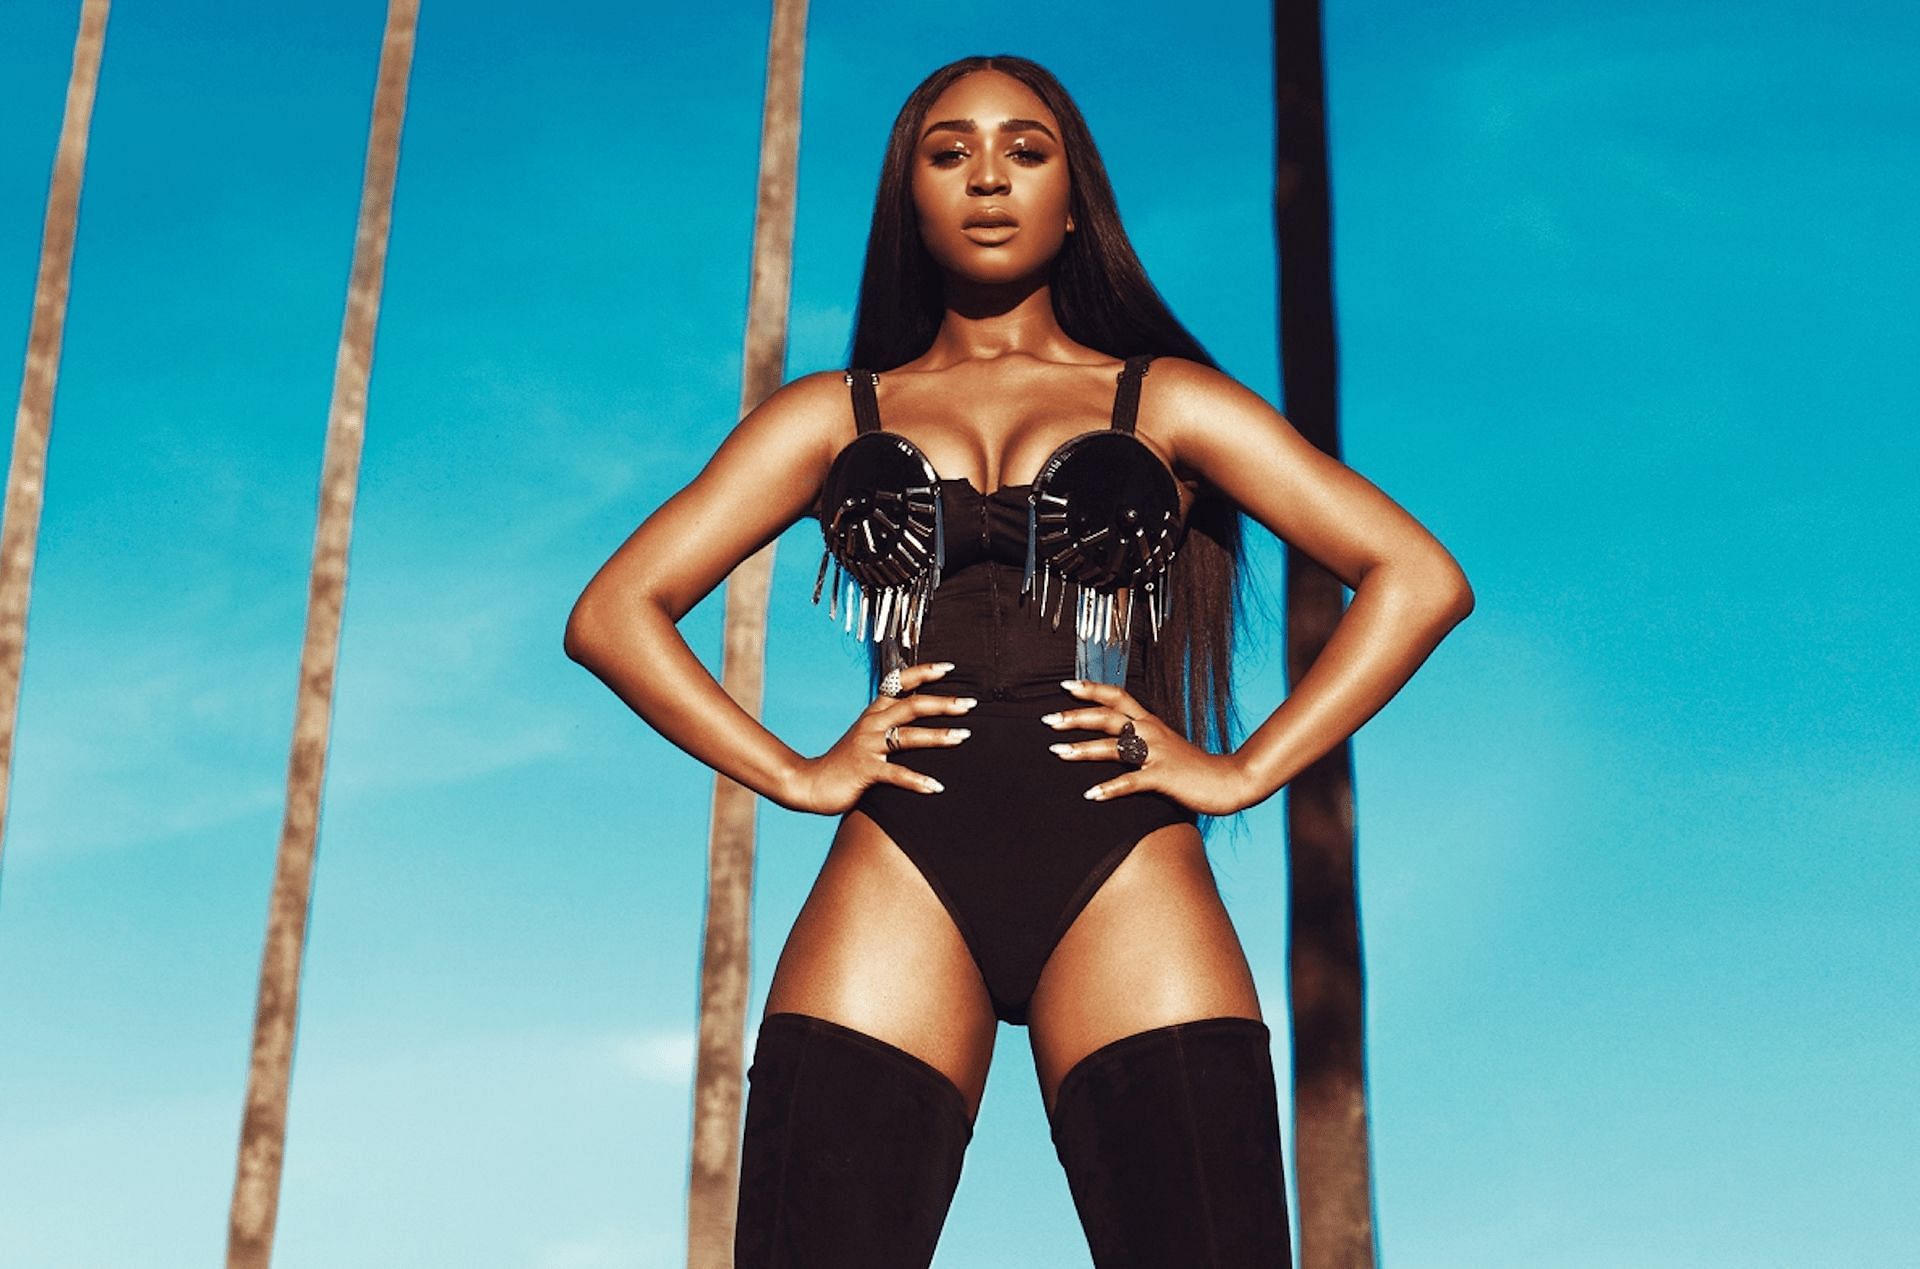 Normani claps back at haters for calling her less motivated and unpassionate about her singing, and her debut album. (Image via Normani/ Instagram)